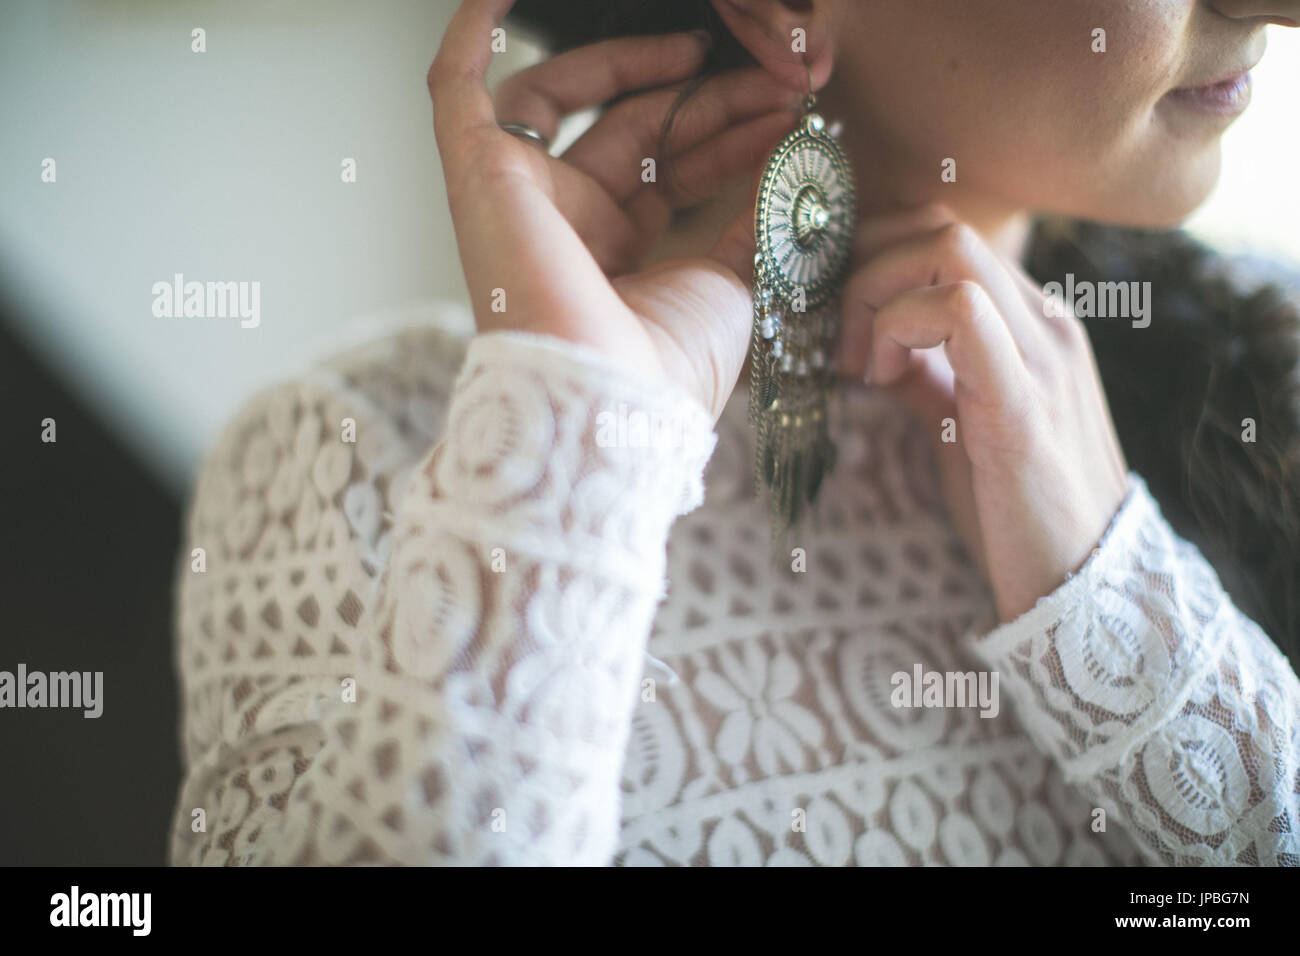 Young bride with Indian jewellery before wedding, close up Stock Photo